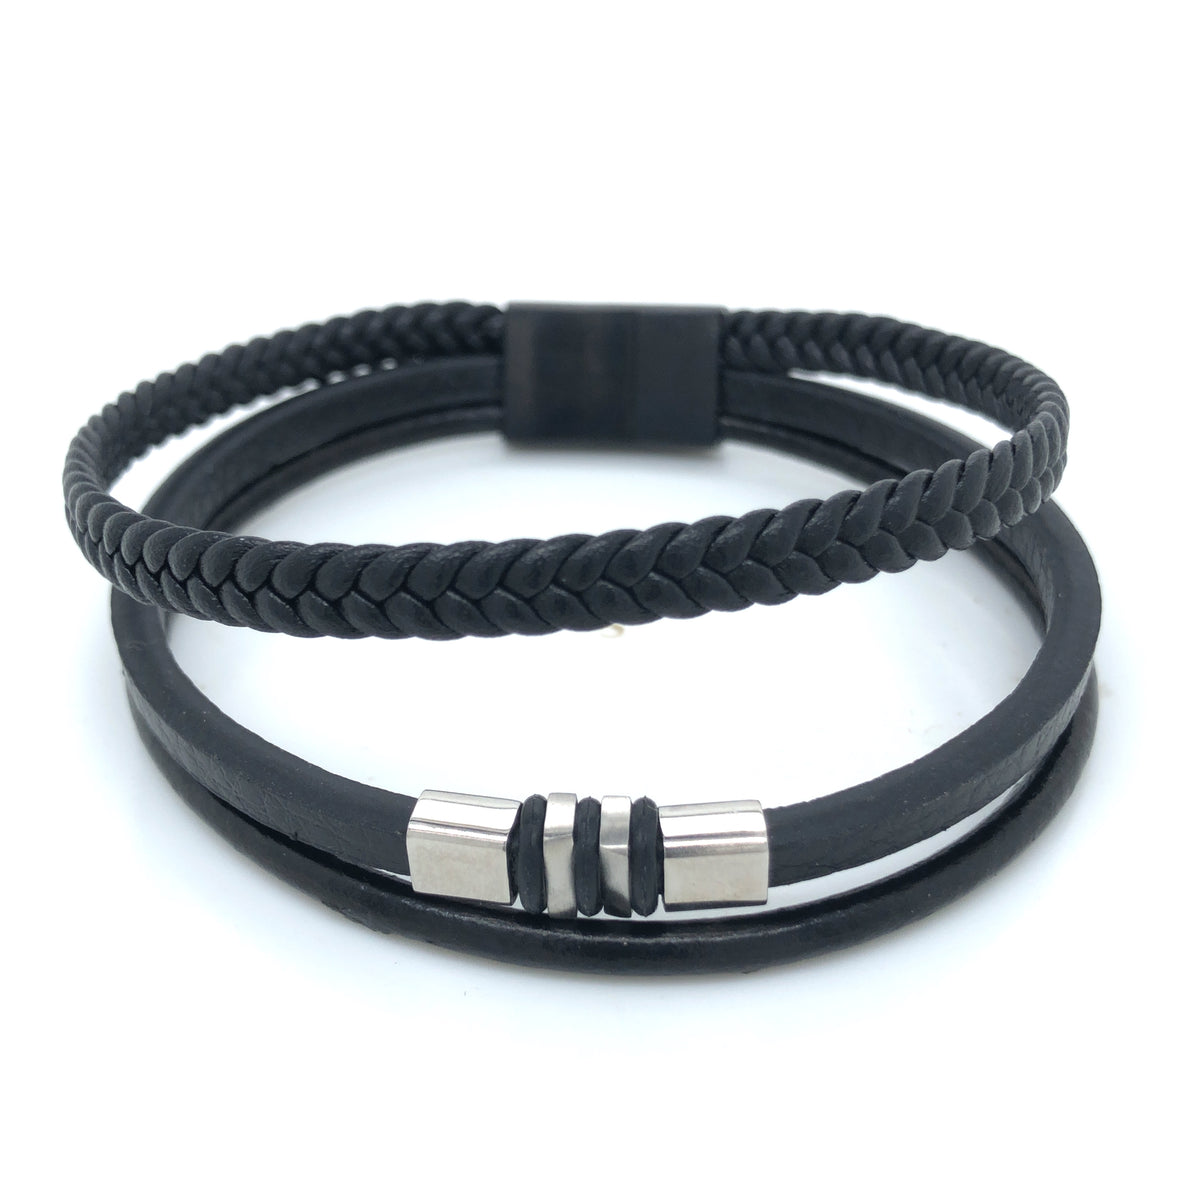 Multi Strand Black Leather Plain And Braided Bracelet With Vintage Detail